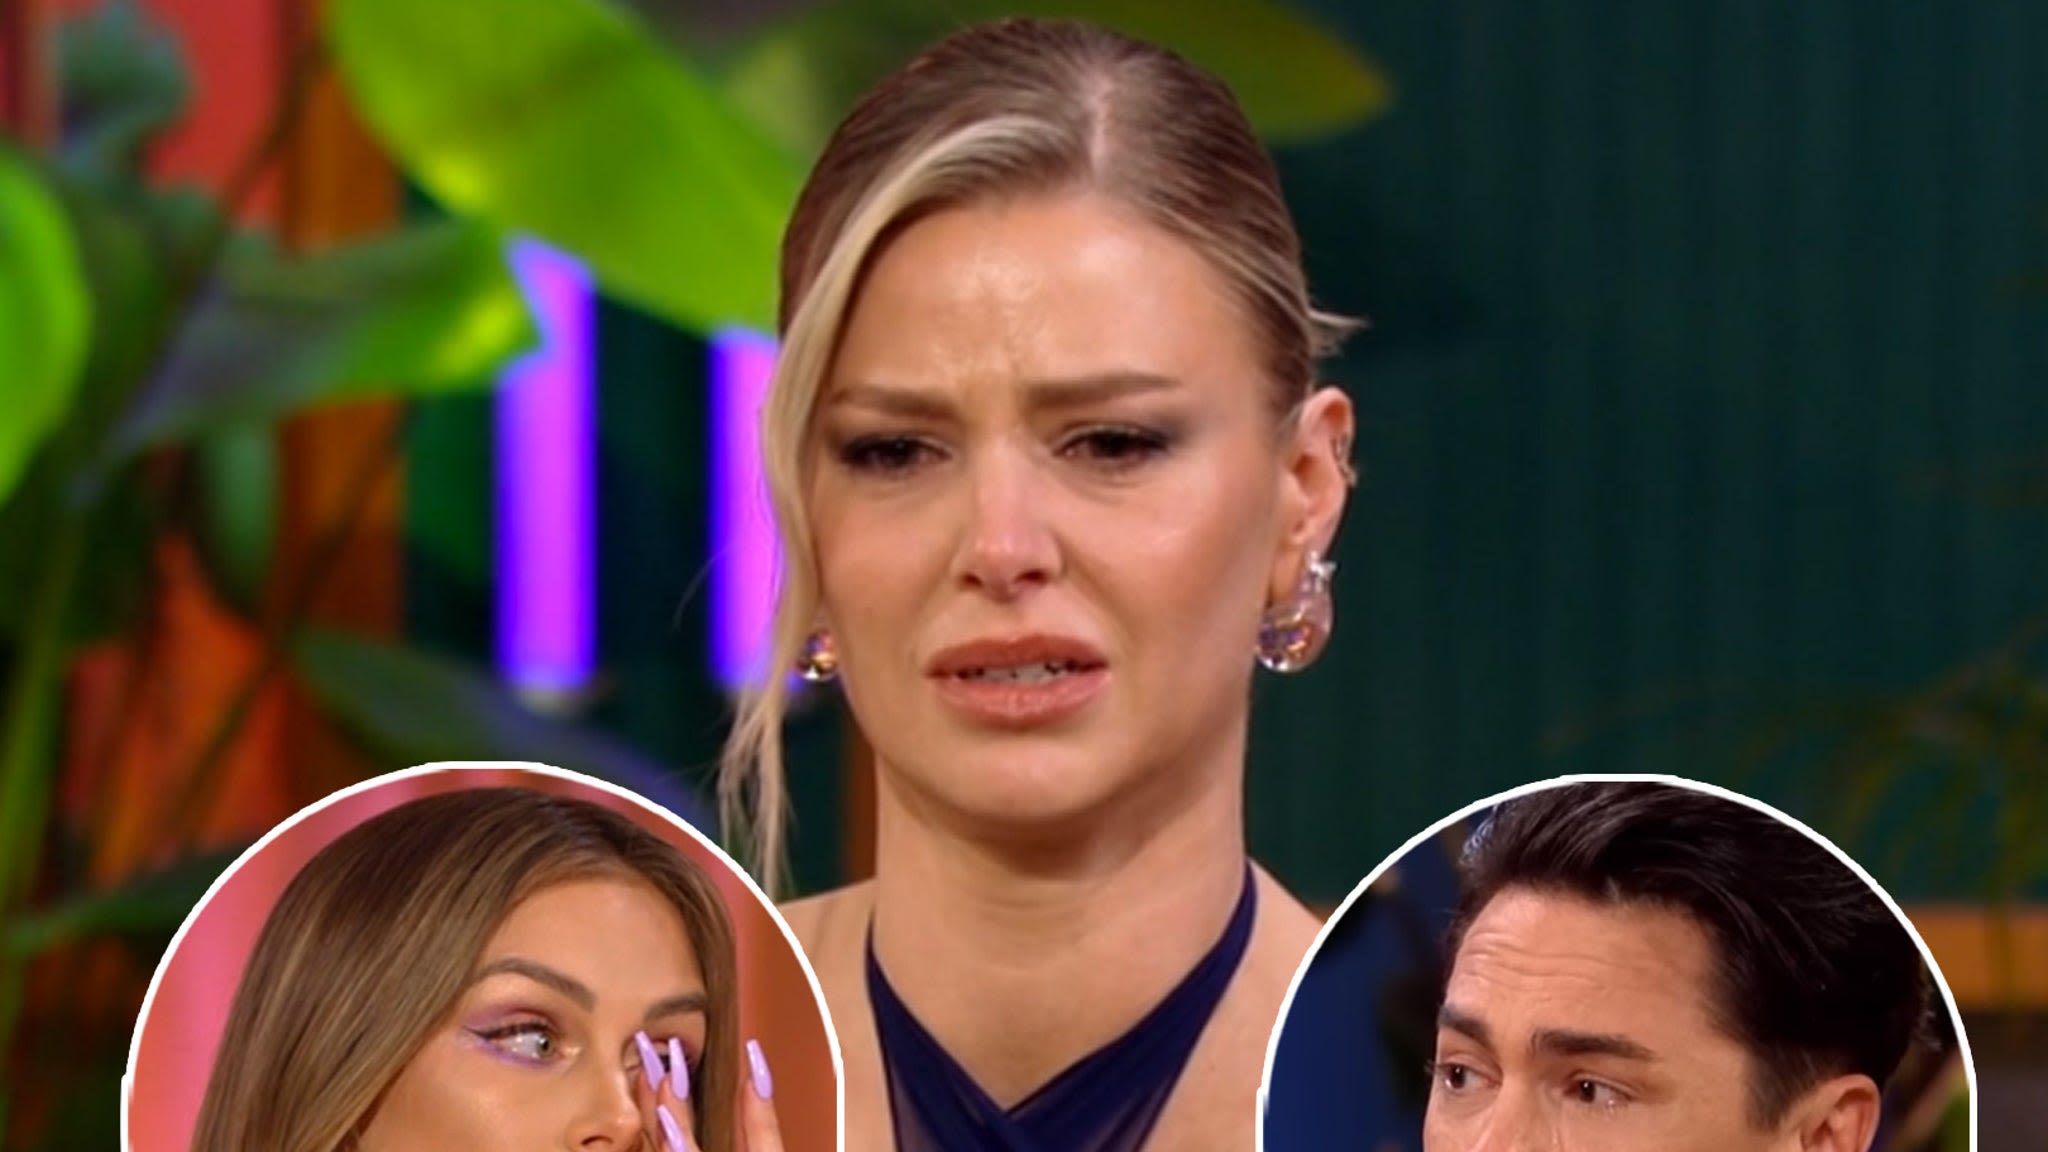 Ariana Madix Breaks Down in Tears at Vanderpump Rules Reunion After Cast Views Finale Fourth Wall Moment for First Time